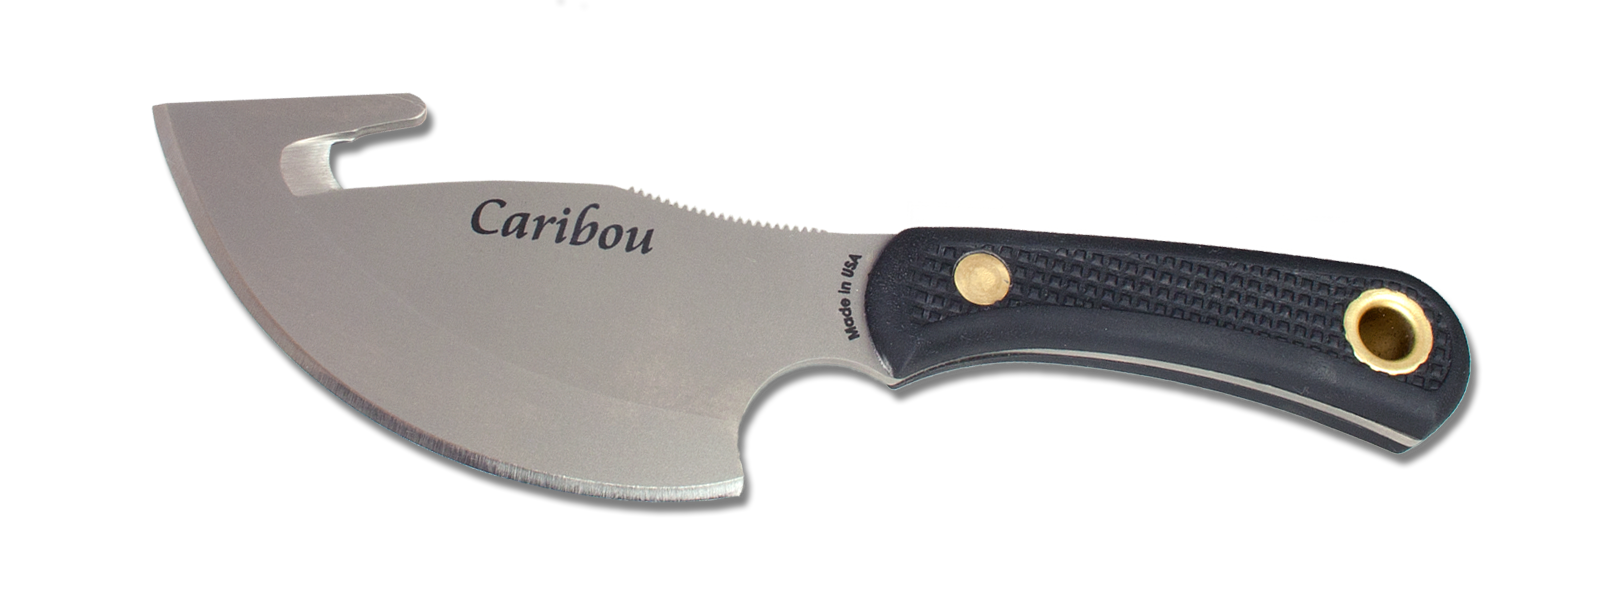 https://www.knivesofalaska.com/images/userfiles/image/products/20180913125140_6_407_caribou.png?width=1620&maxheight=1200&autocrop=1